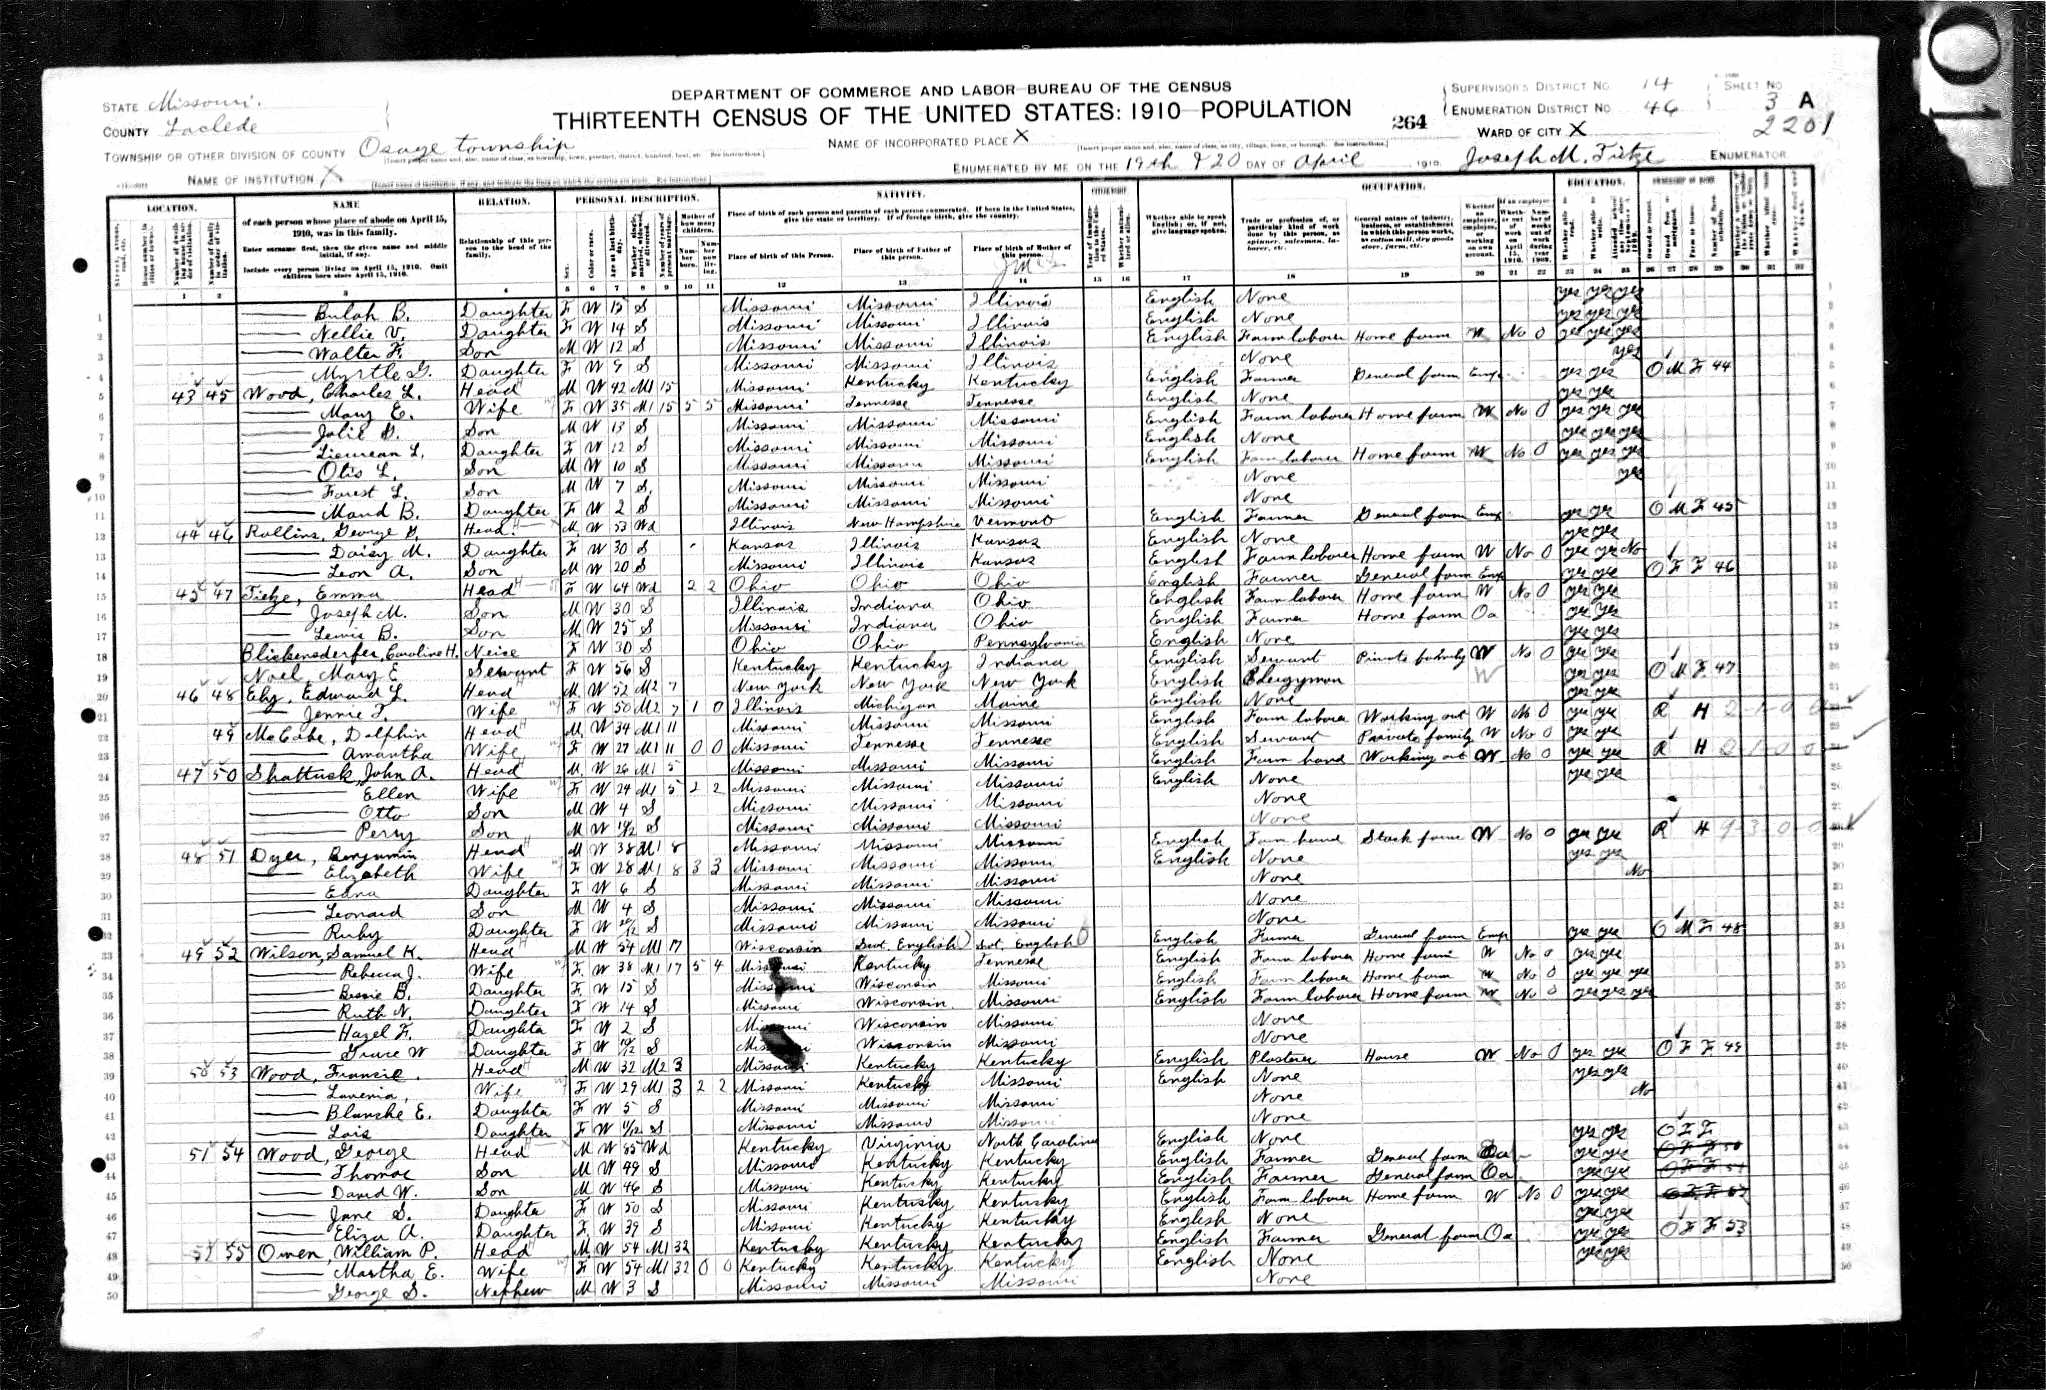 Charles L. Wood, 1910 Laclede County, Missouri, census